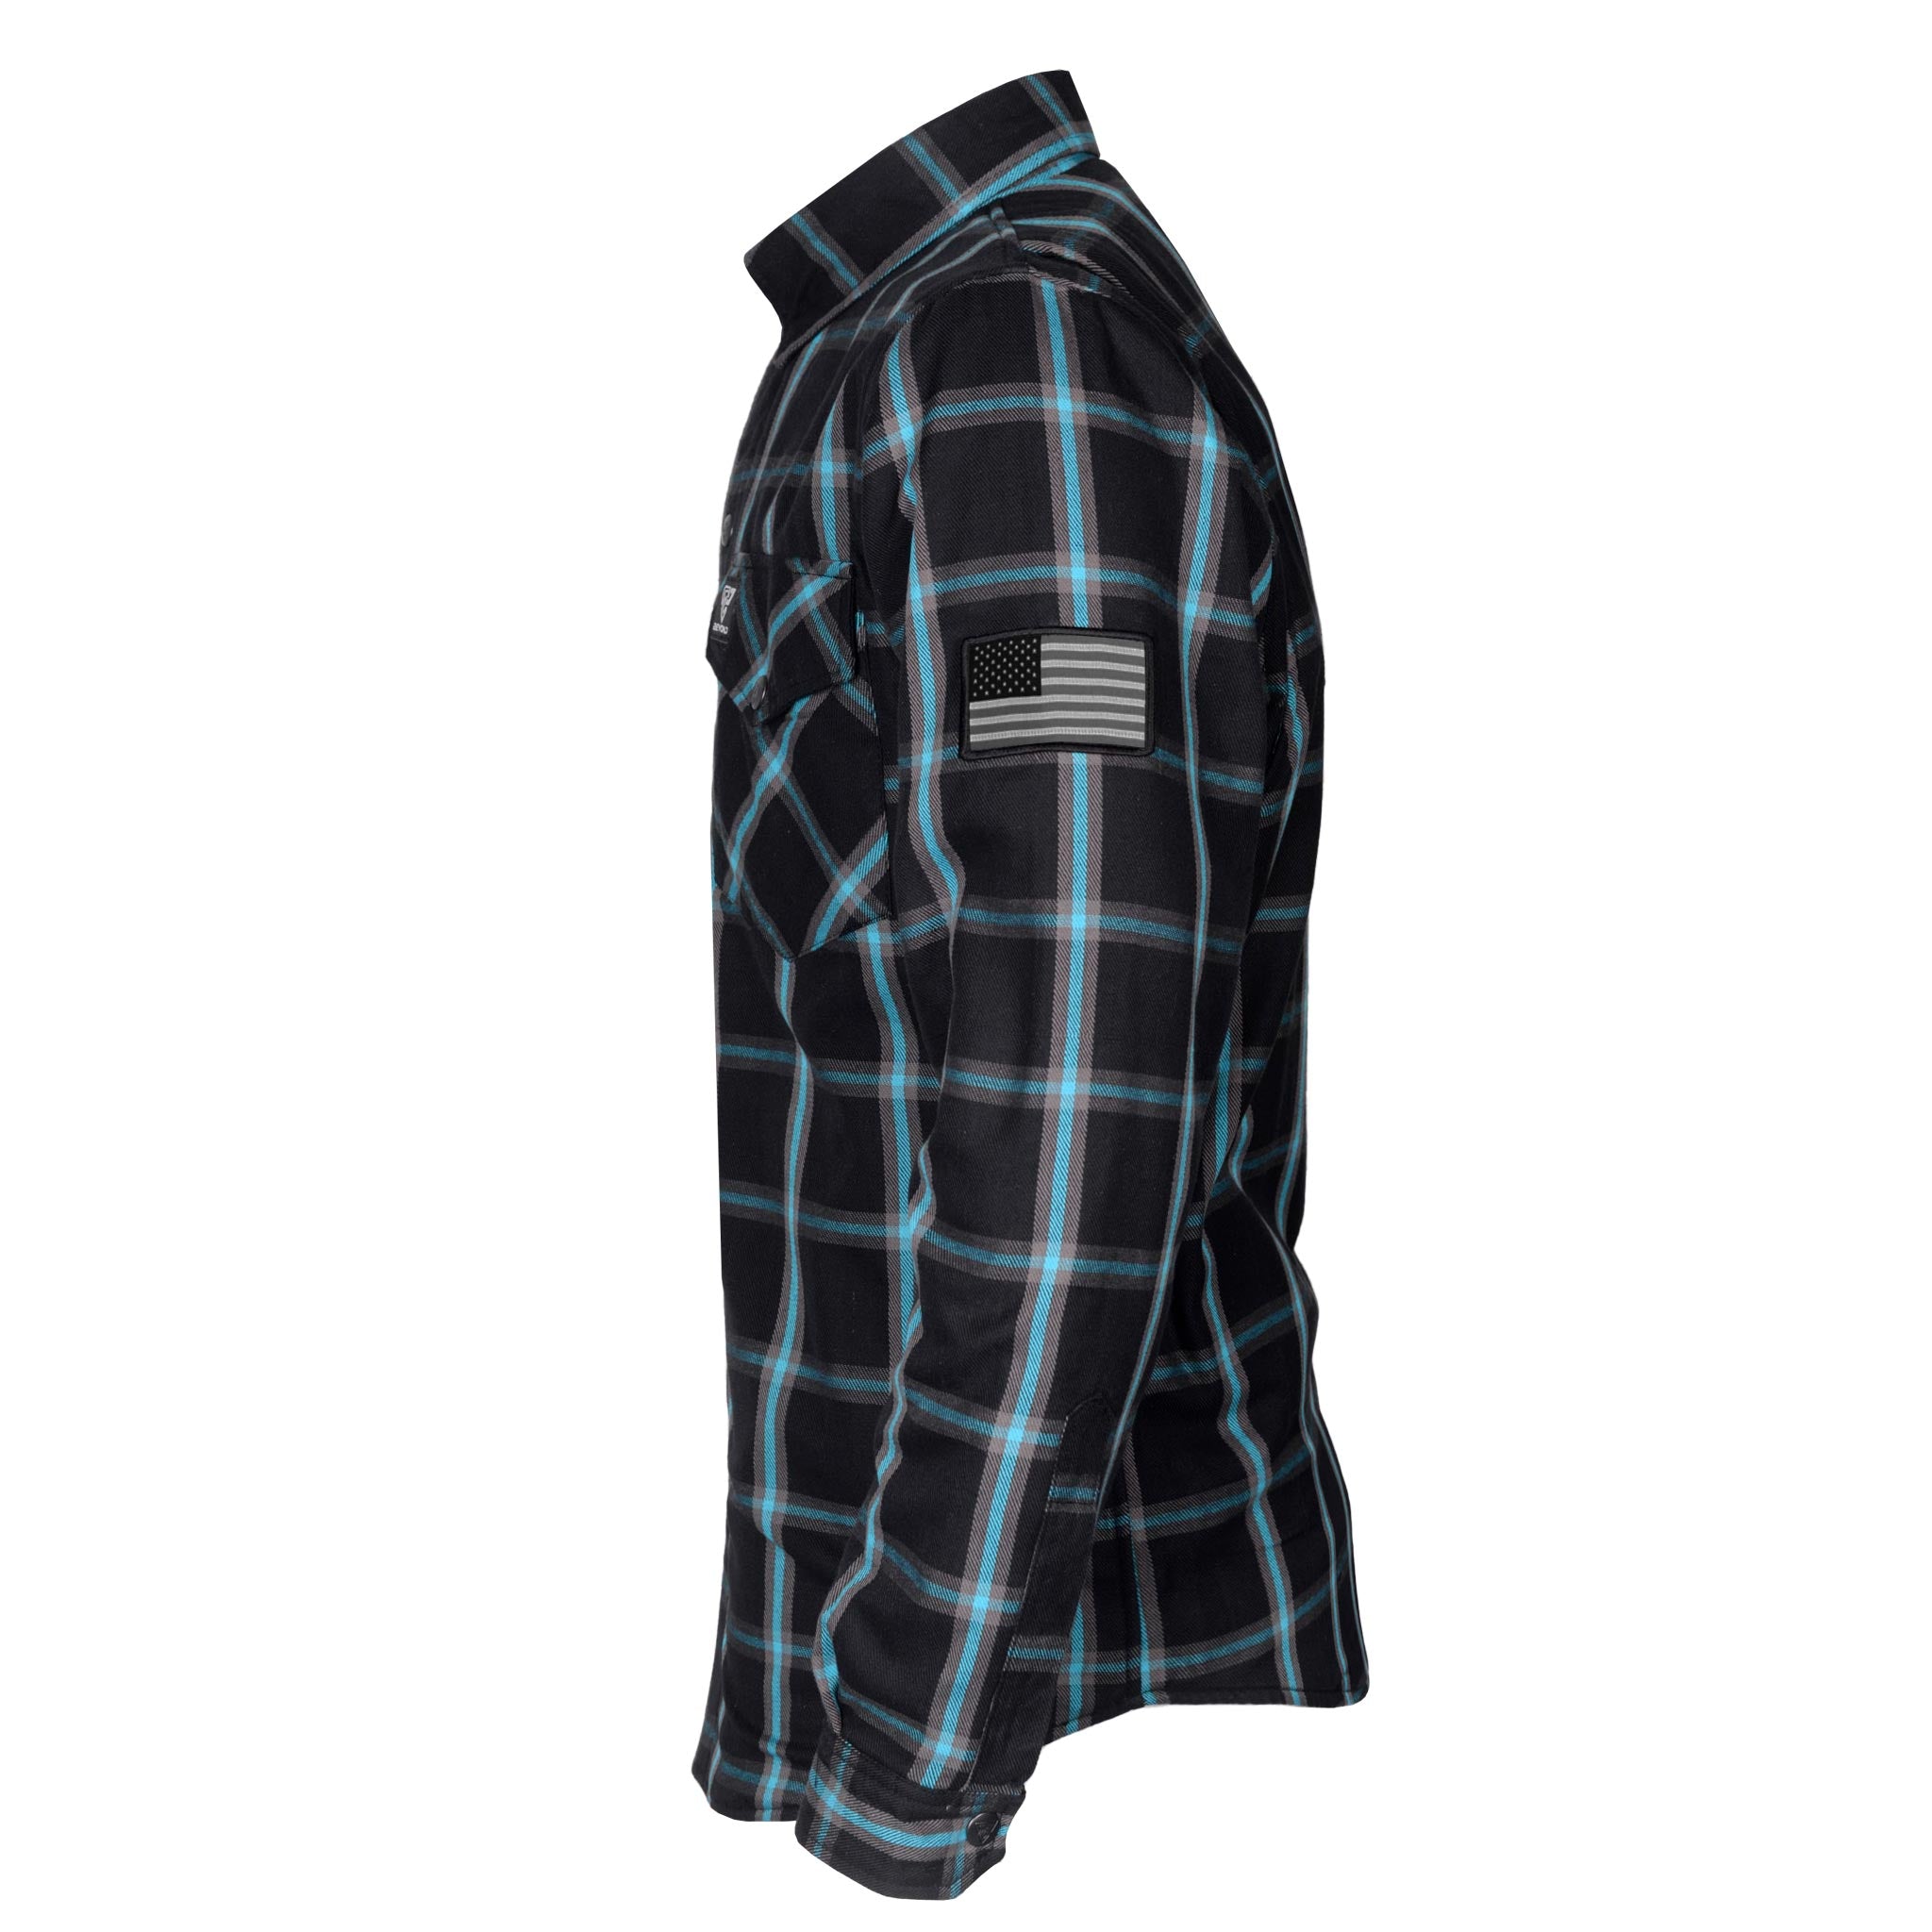 flannel-men's-shirt-in-black-checkered-blue-stipes-with-USA-flag-on-sleeve-left-side